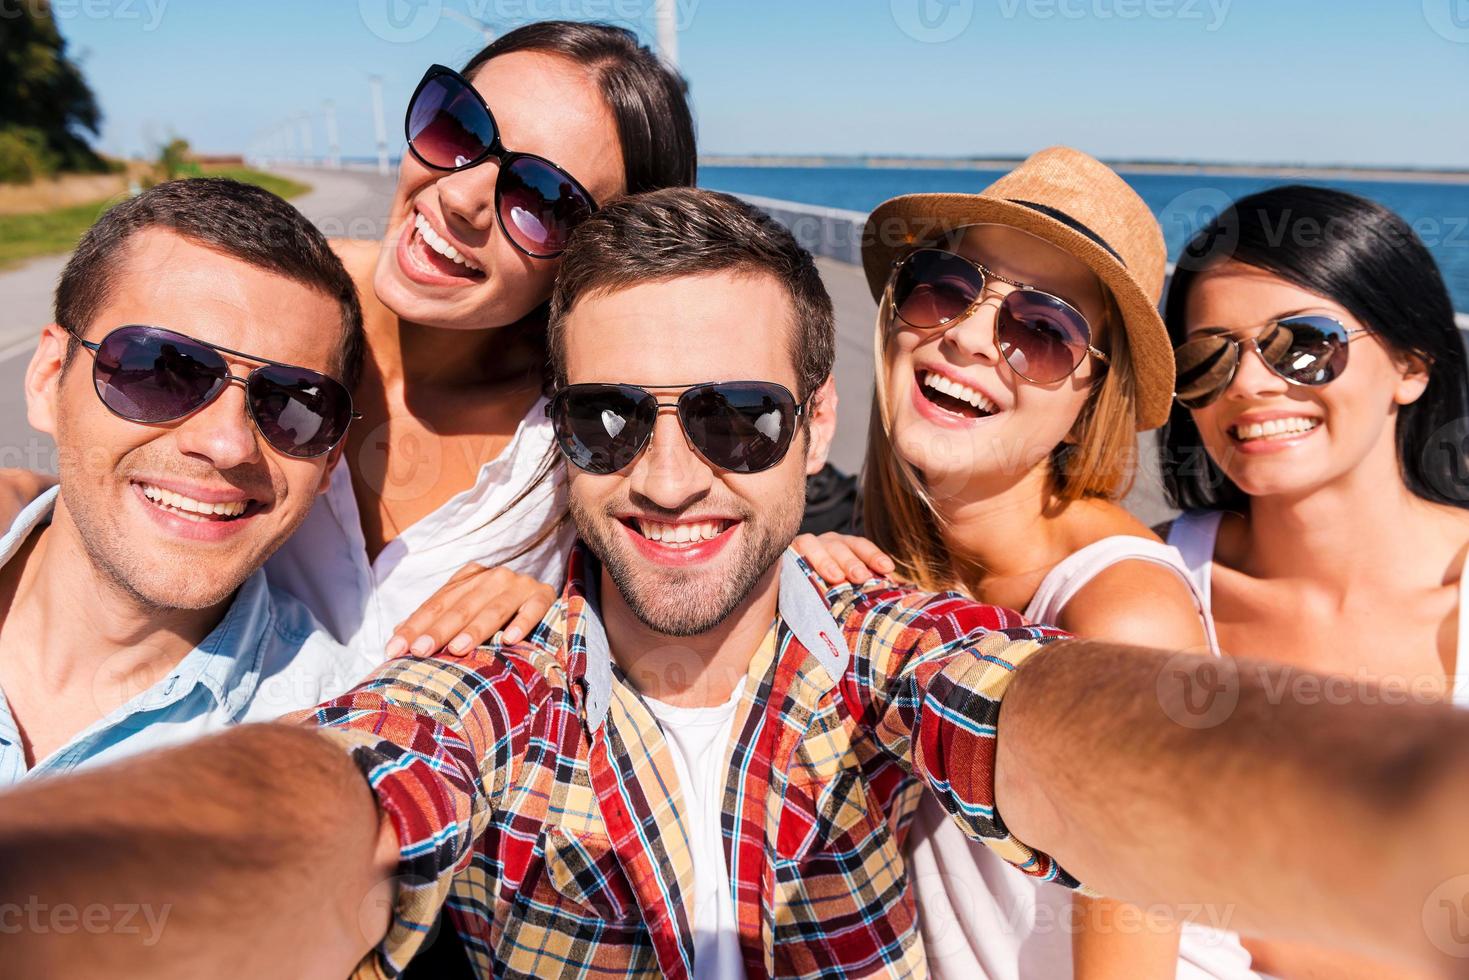 Capturing fun. Five young happy people making selfie and smiling photo